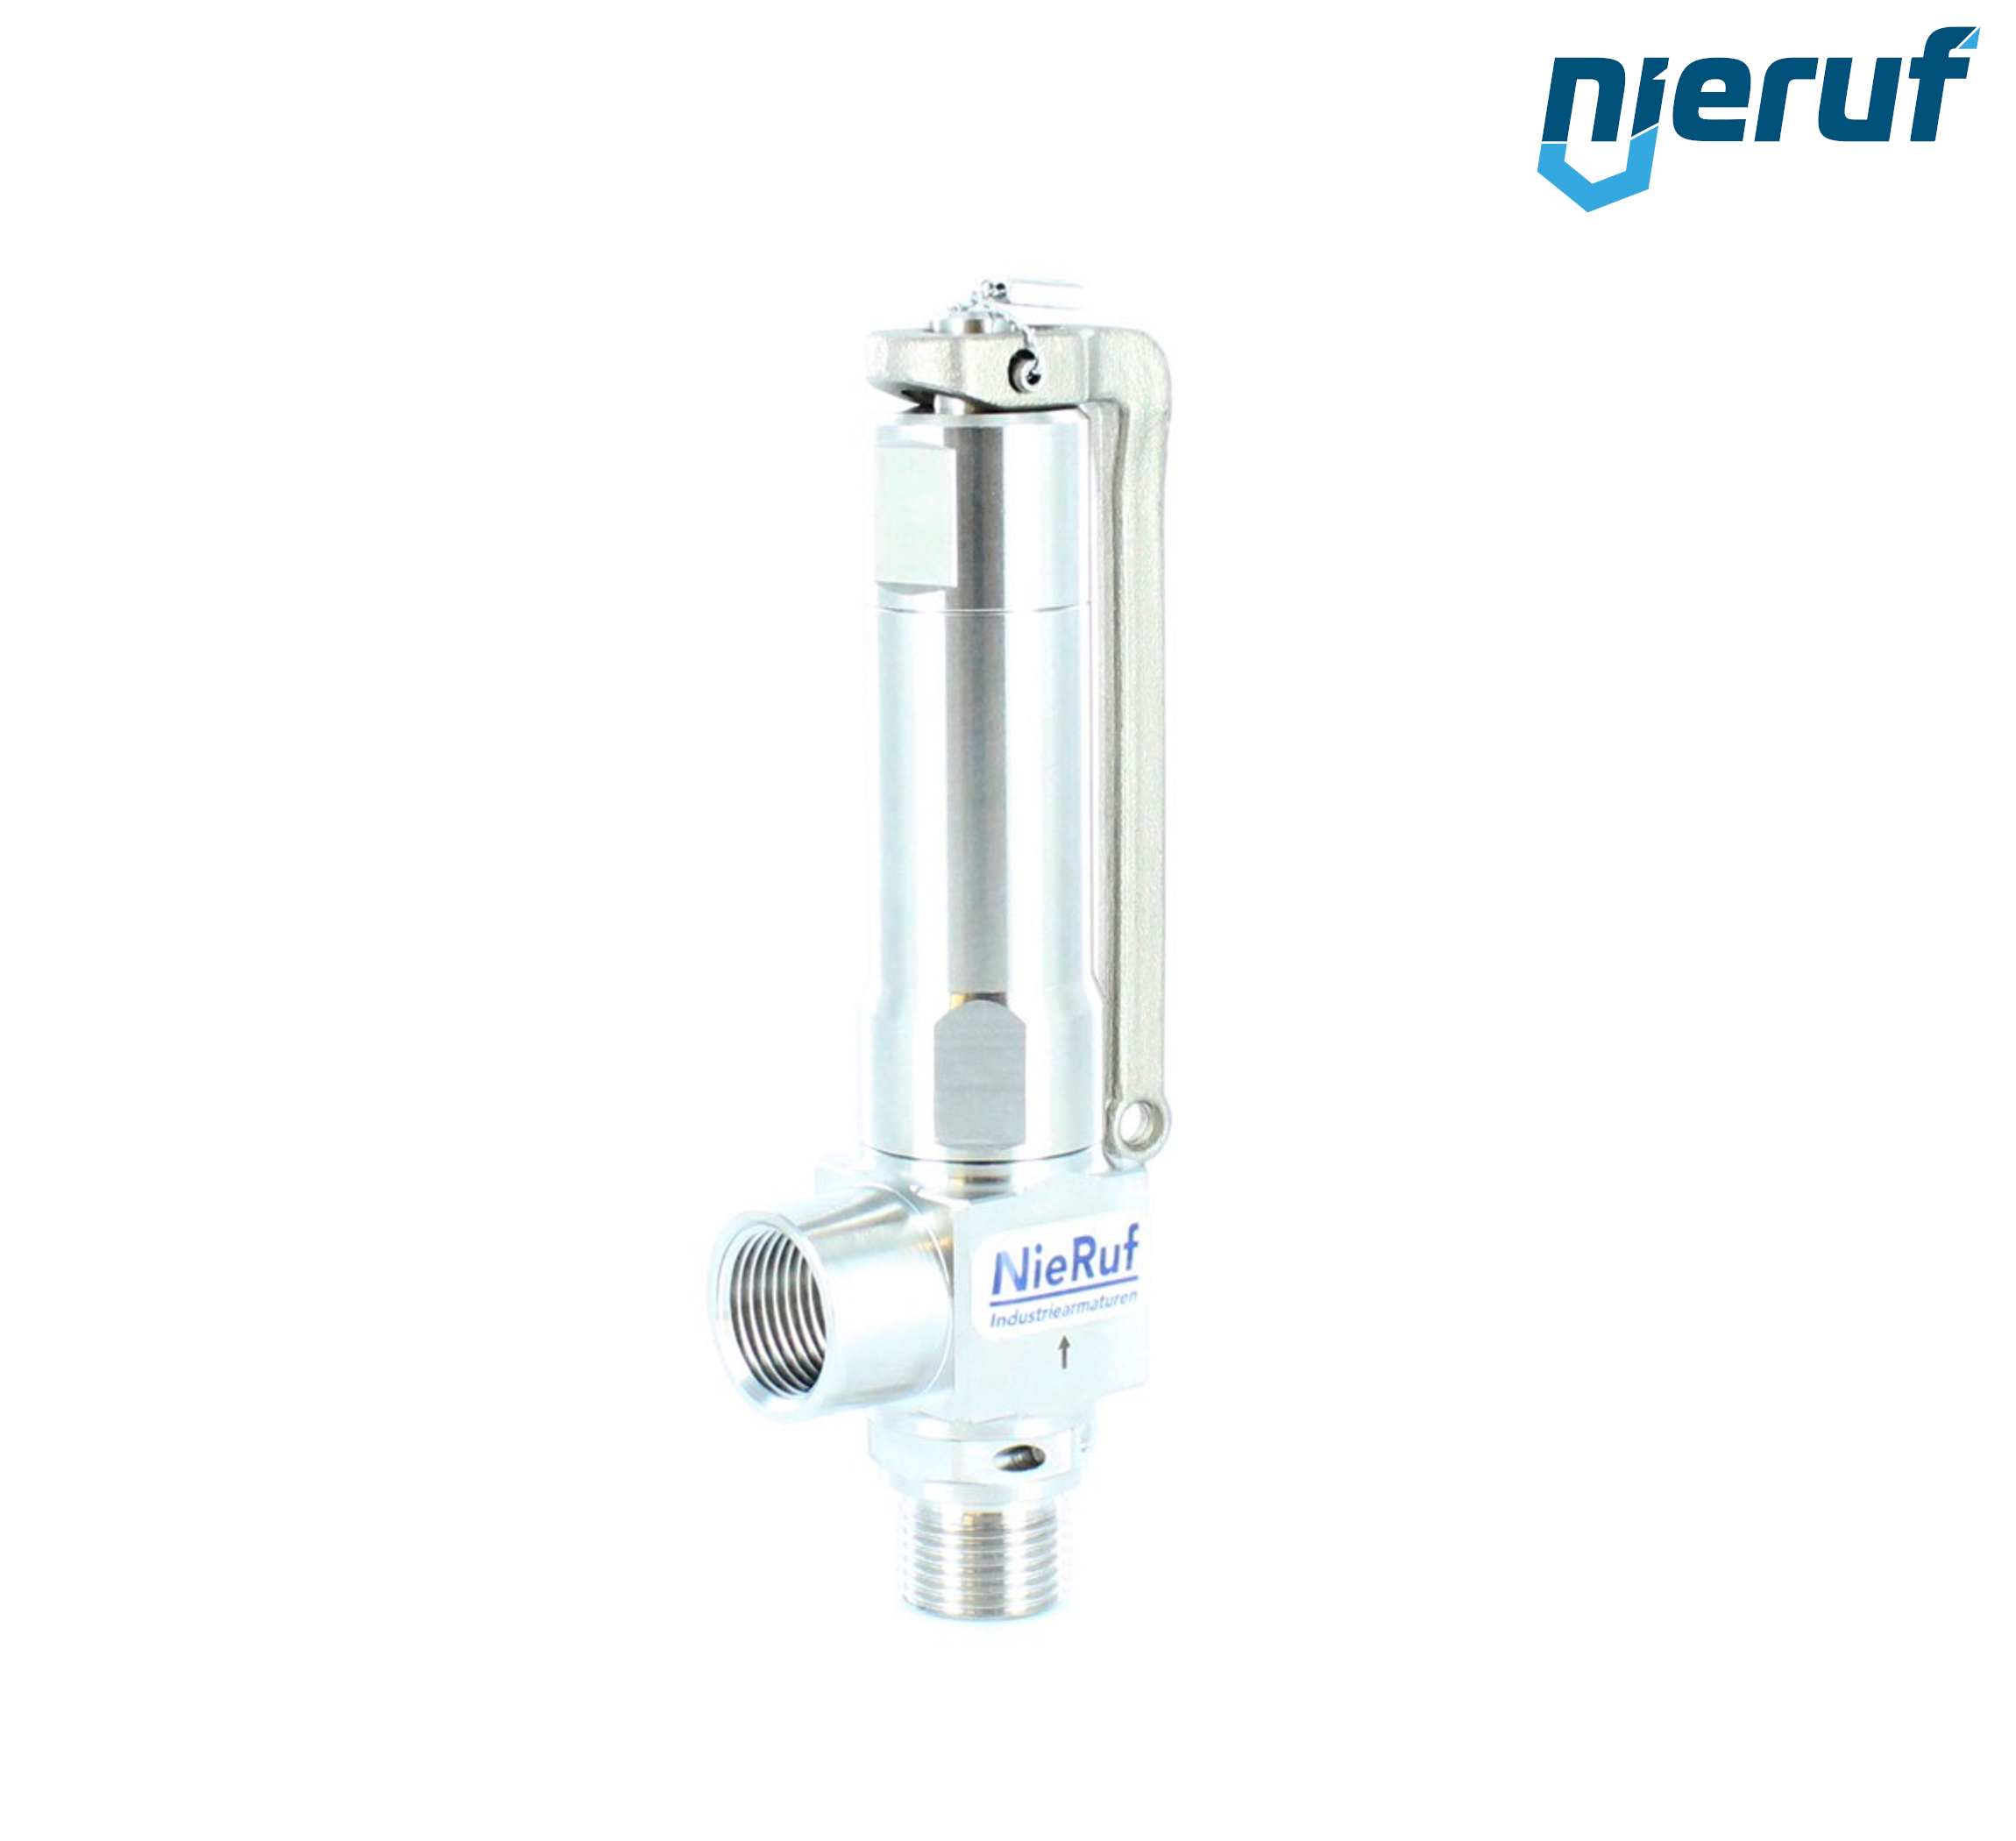 angle-type safety valve 3/8" m  x 3/8" fm SV12, stainless steel FKM, with lever